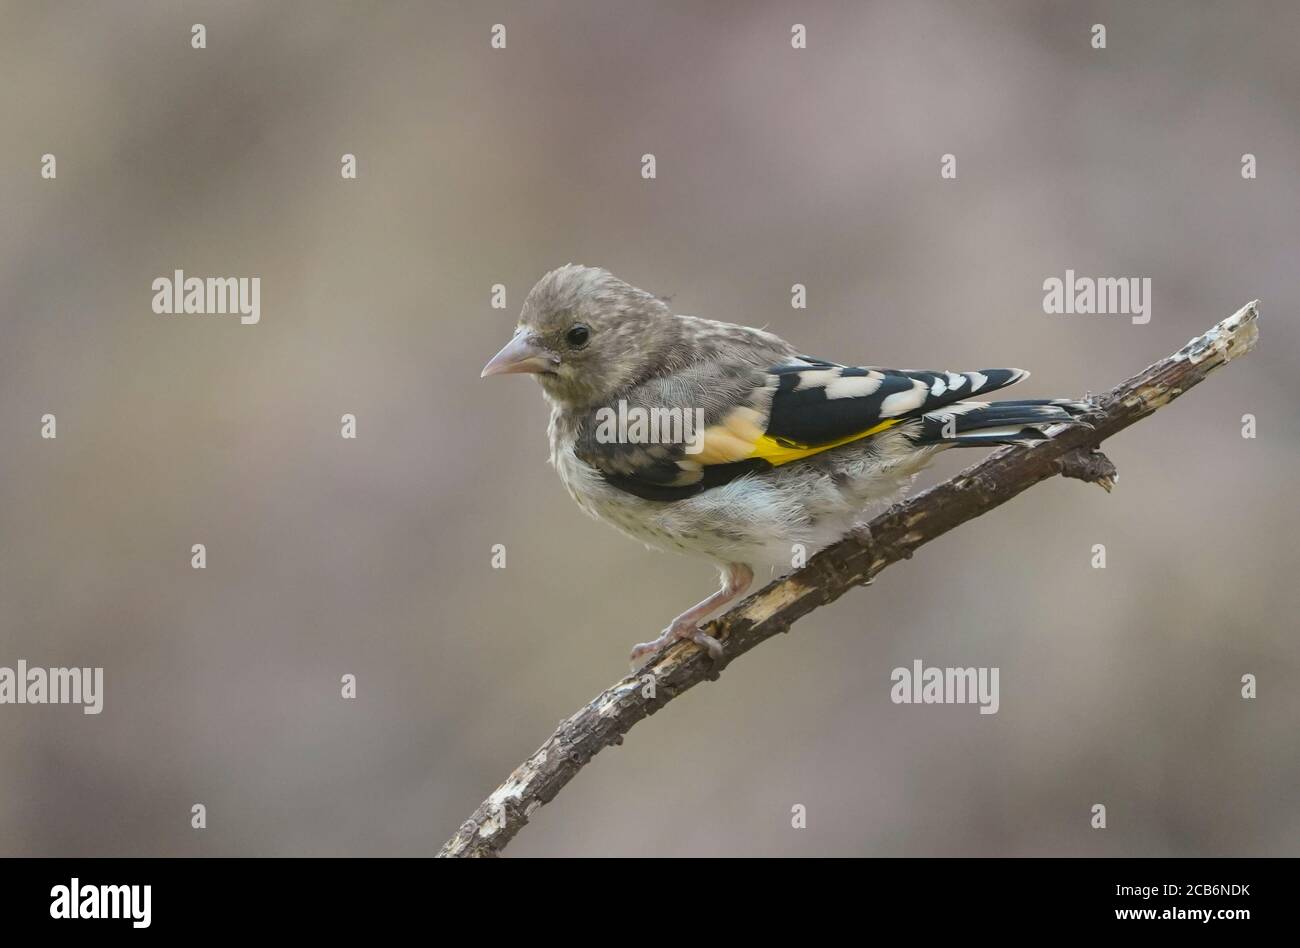 Juvenile European goldfinch, Carduelis carduelis, on a branch going to drink water. Spain. Stock Photo